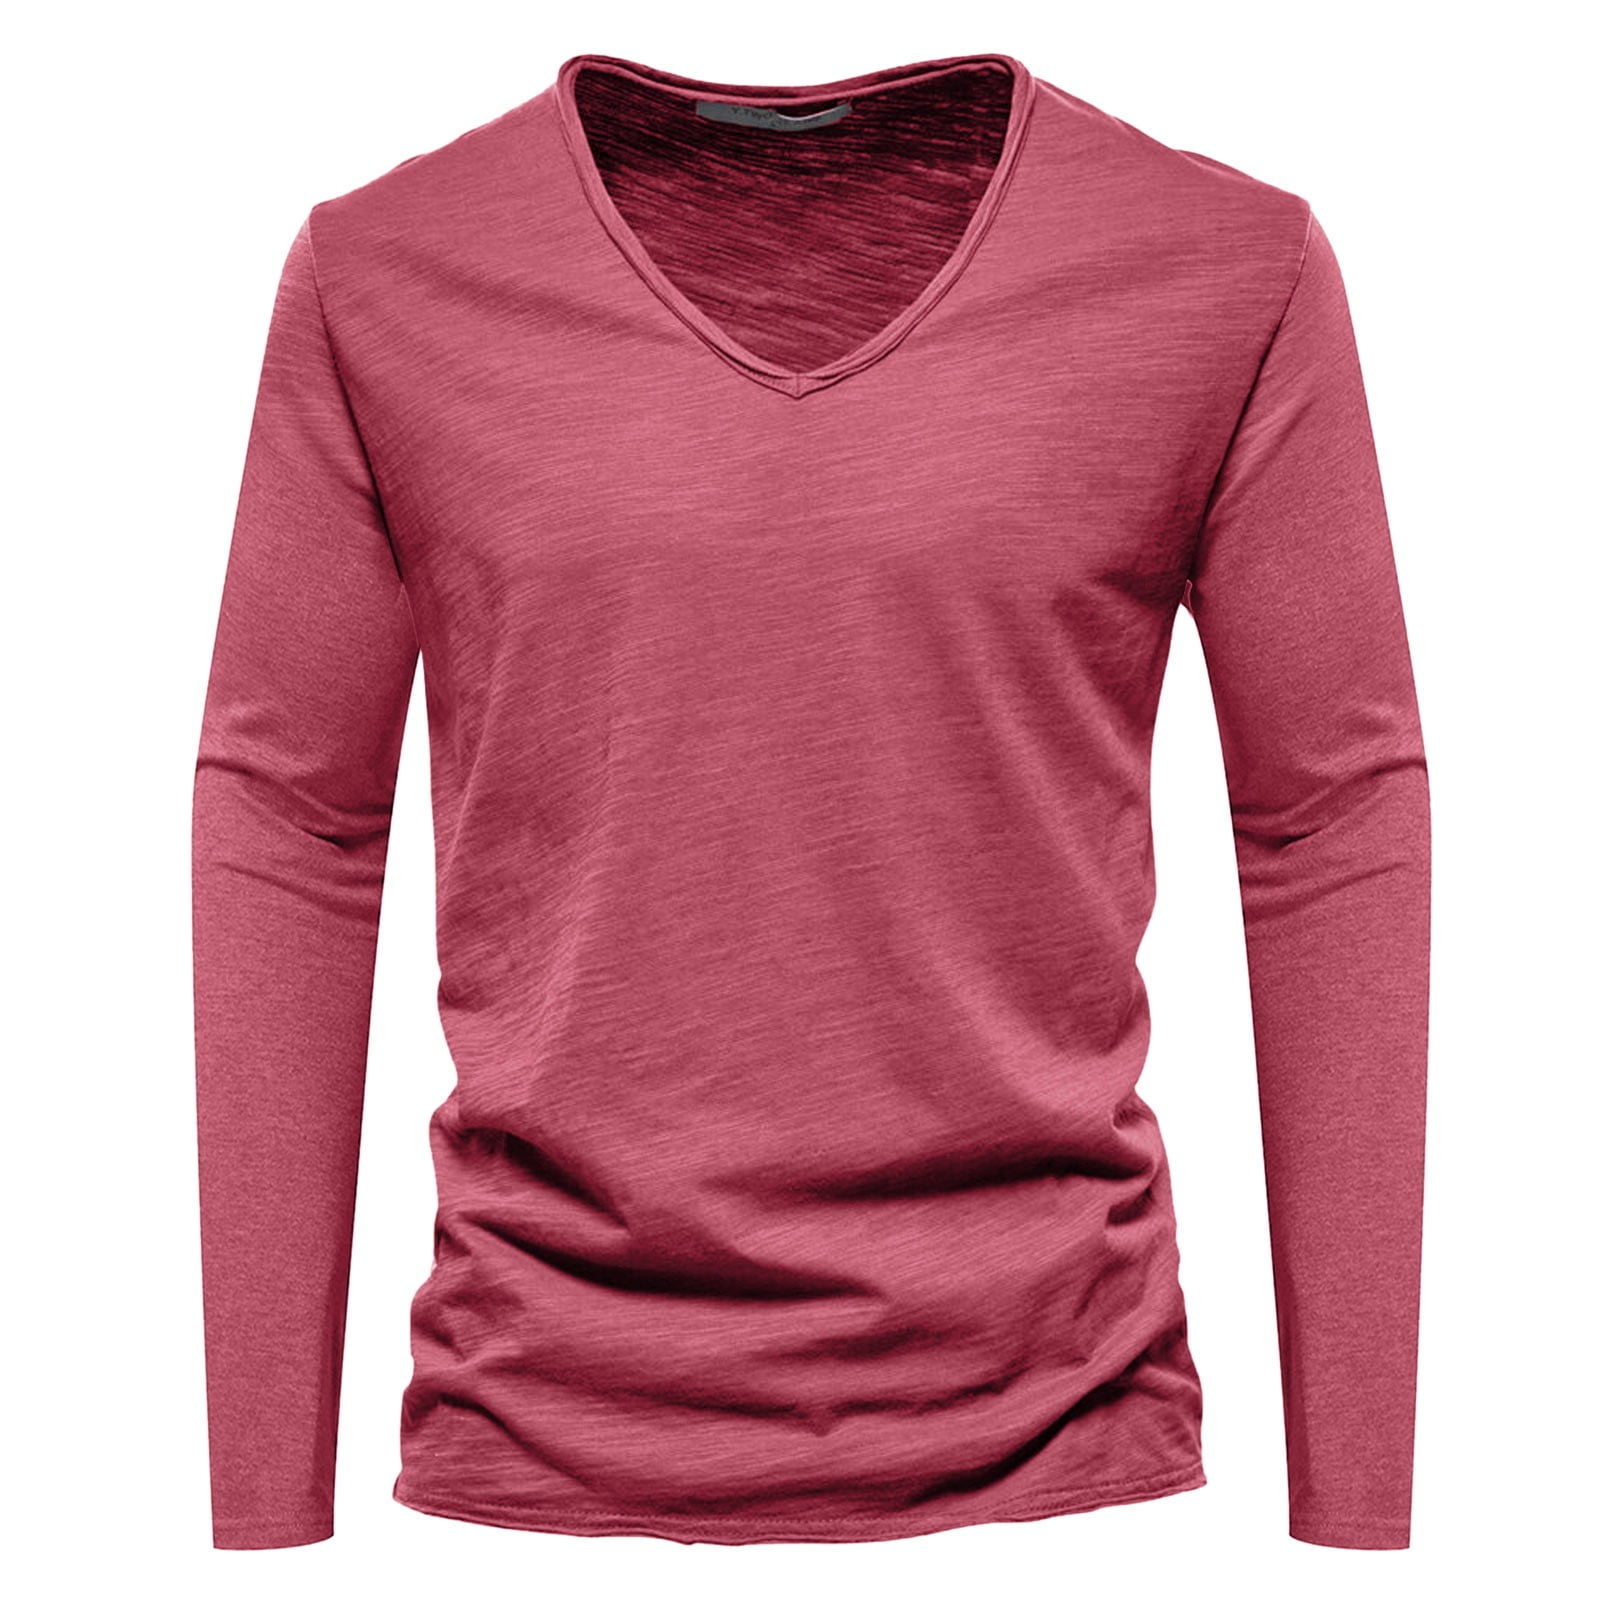 Tosmy Men's T-Shirt Mens Fashion Casual Solid Color Cotton V Neck Long ...